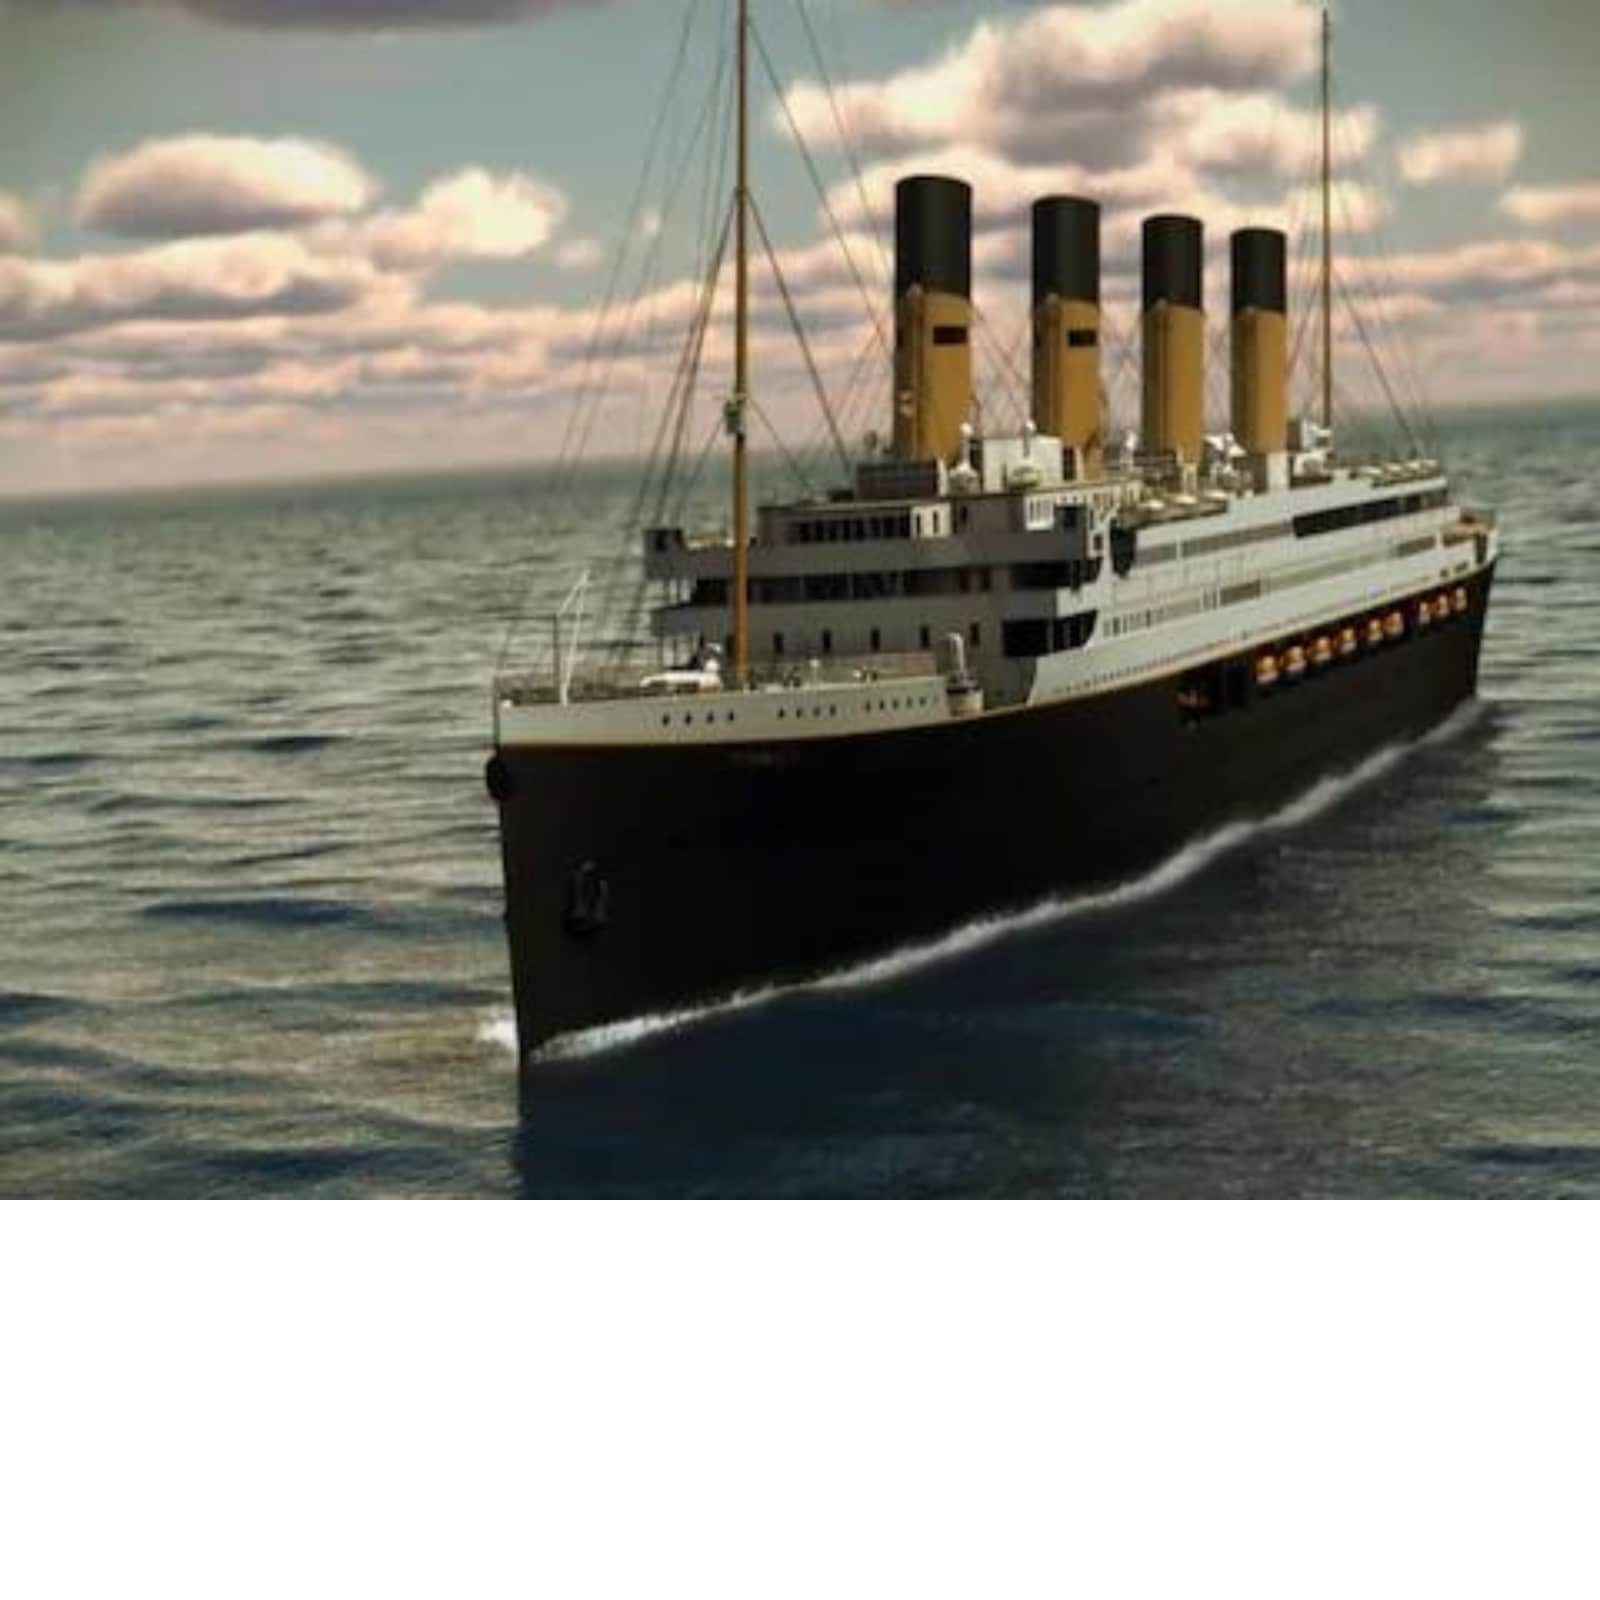 Blue Star's Titanic II Would Sail The Same Route As Original